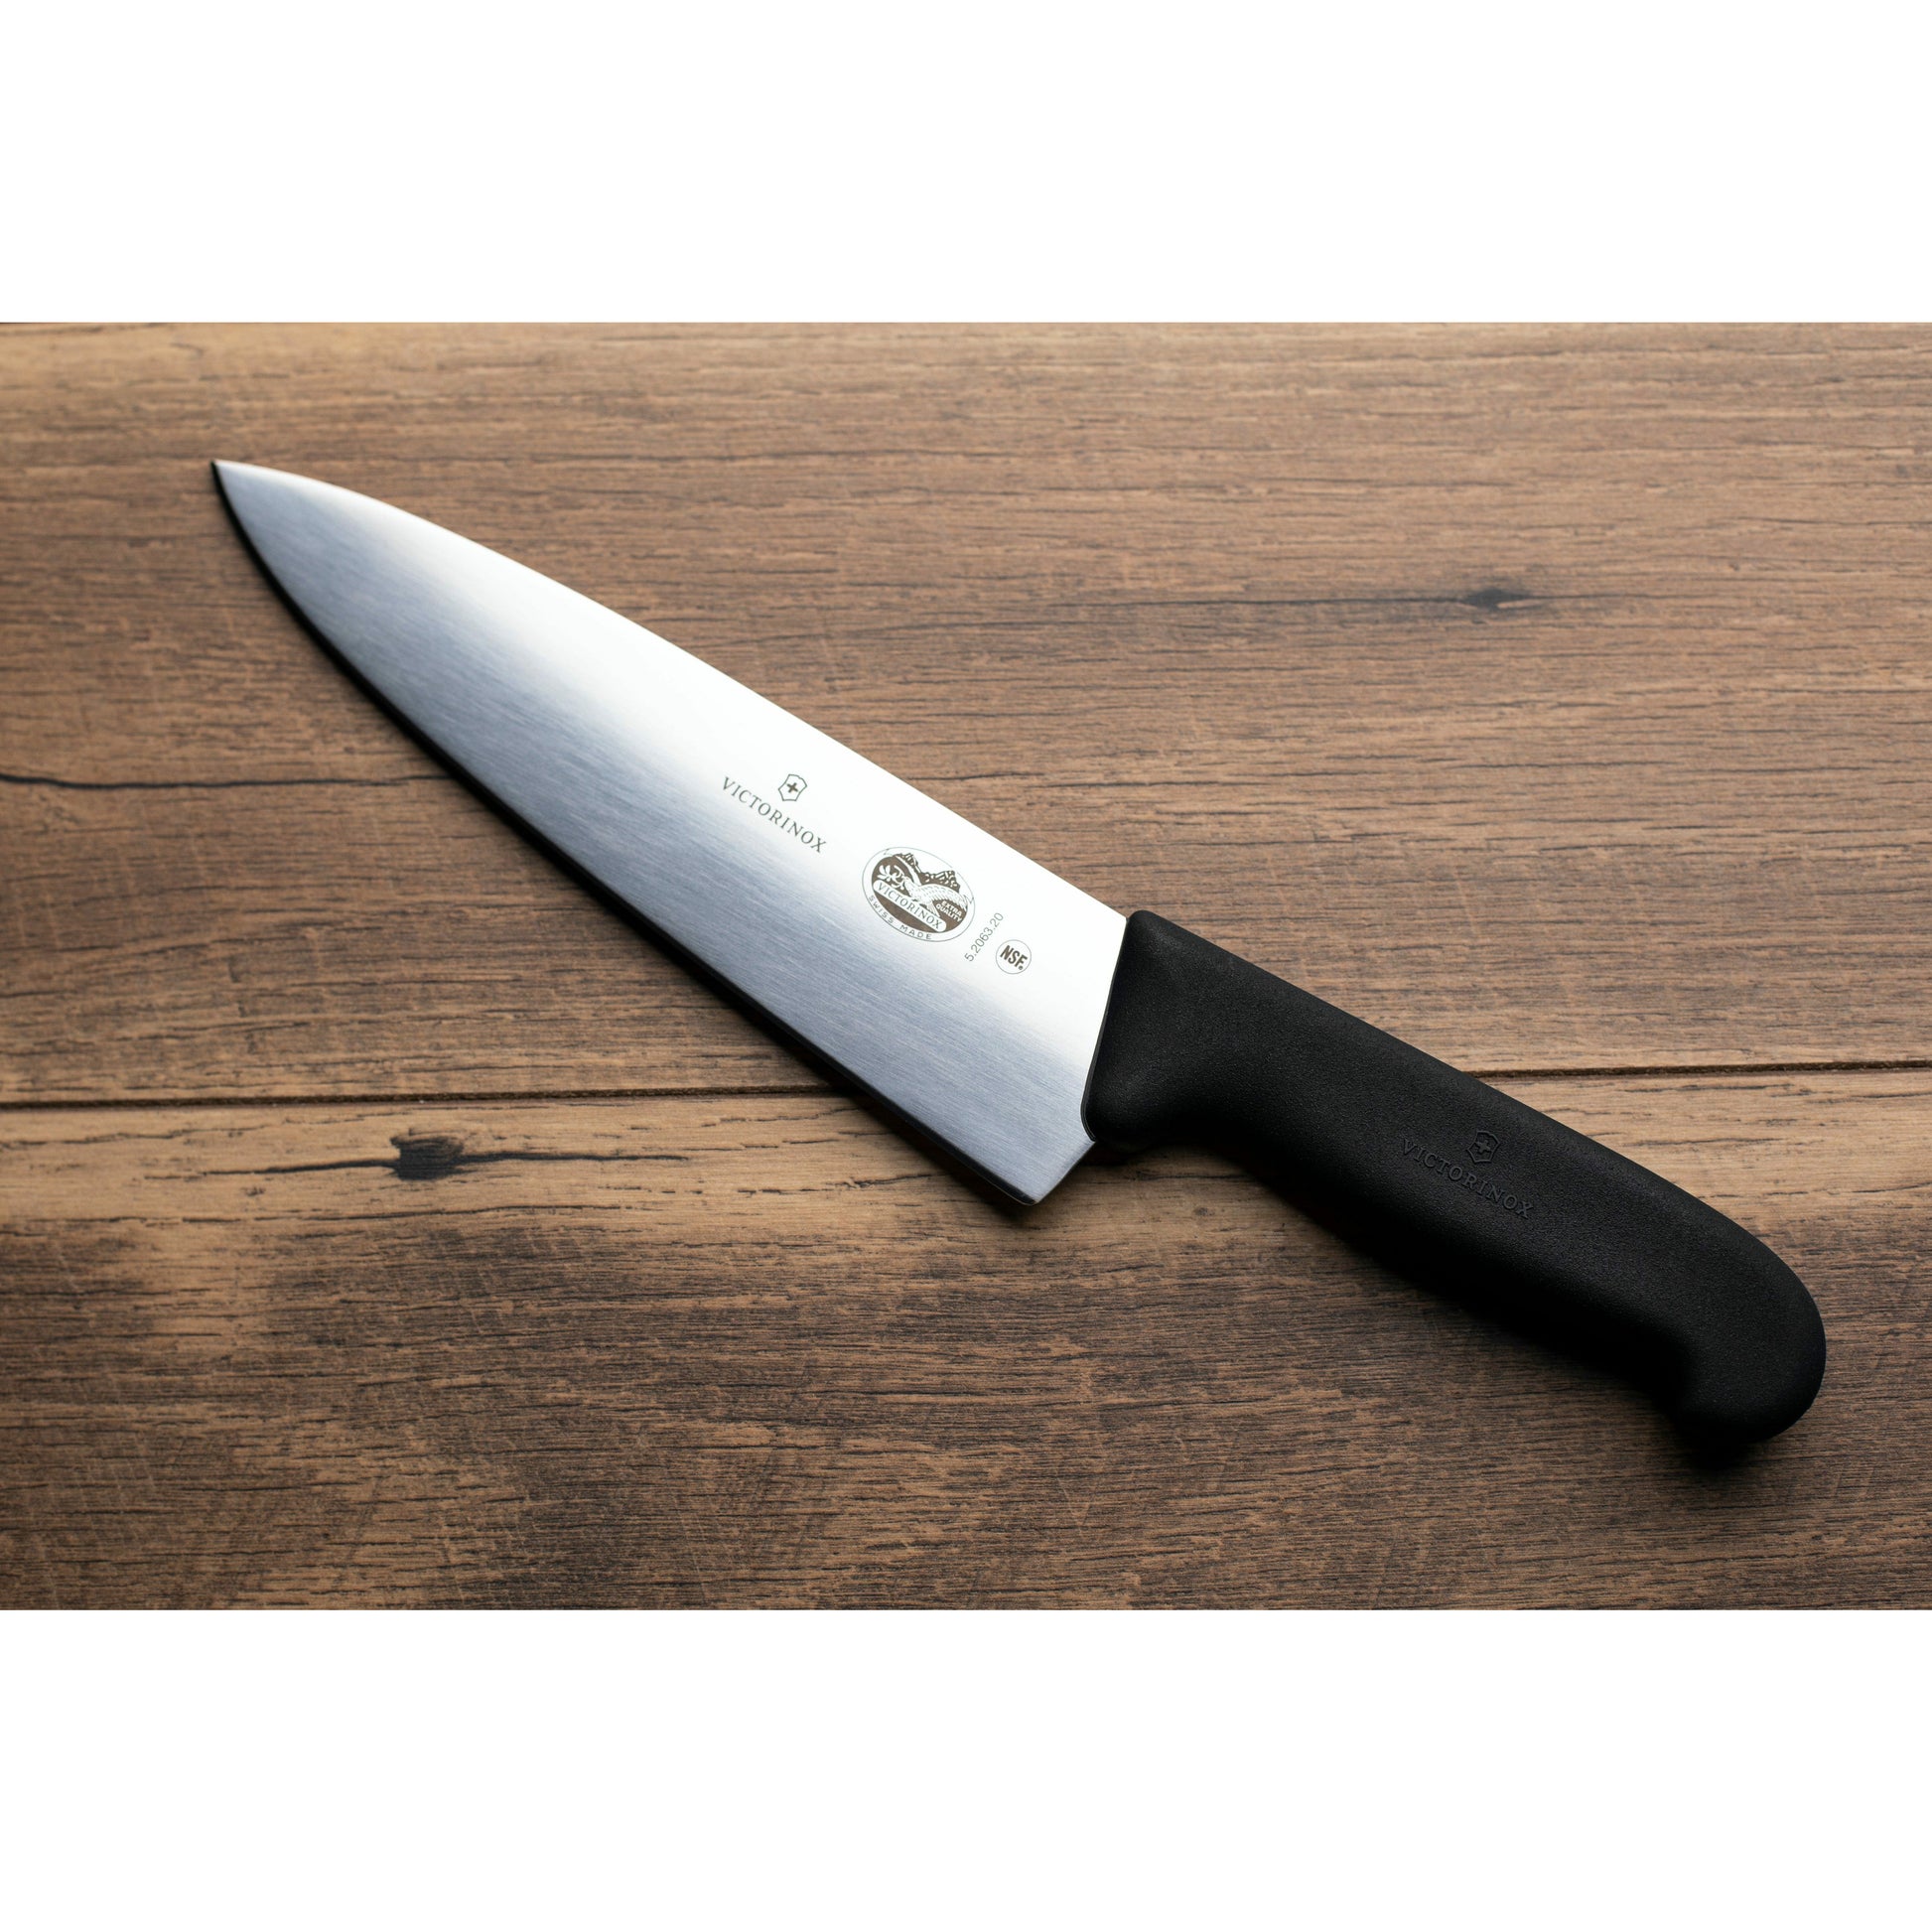 Victorinox Fibrox Pro 10” Chef's Knife w/ Rounded Tip – PERFECT